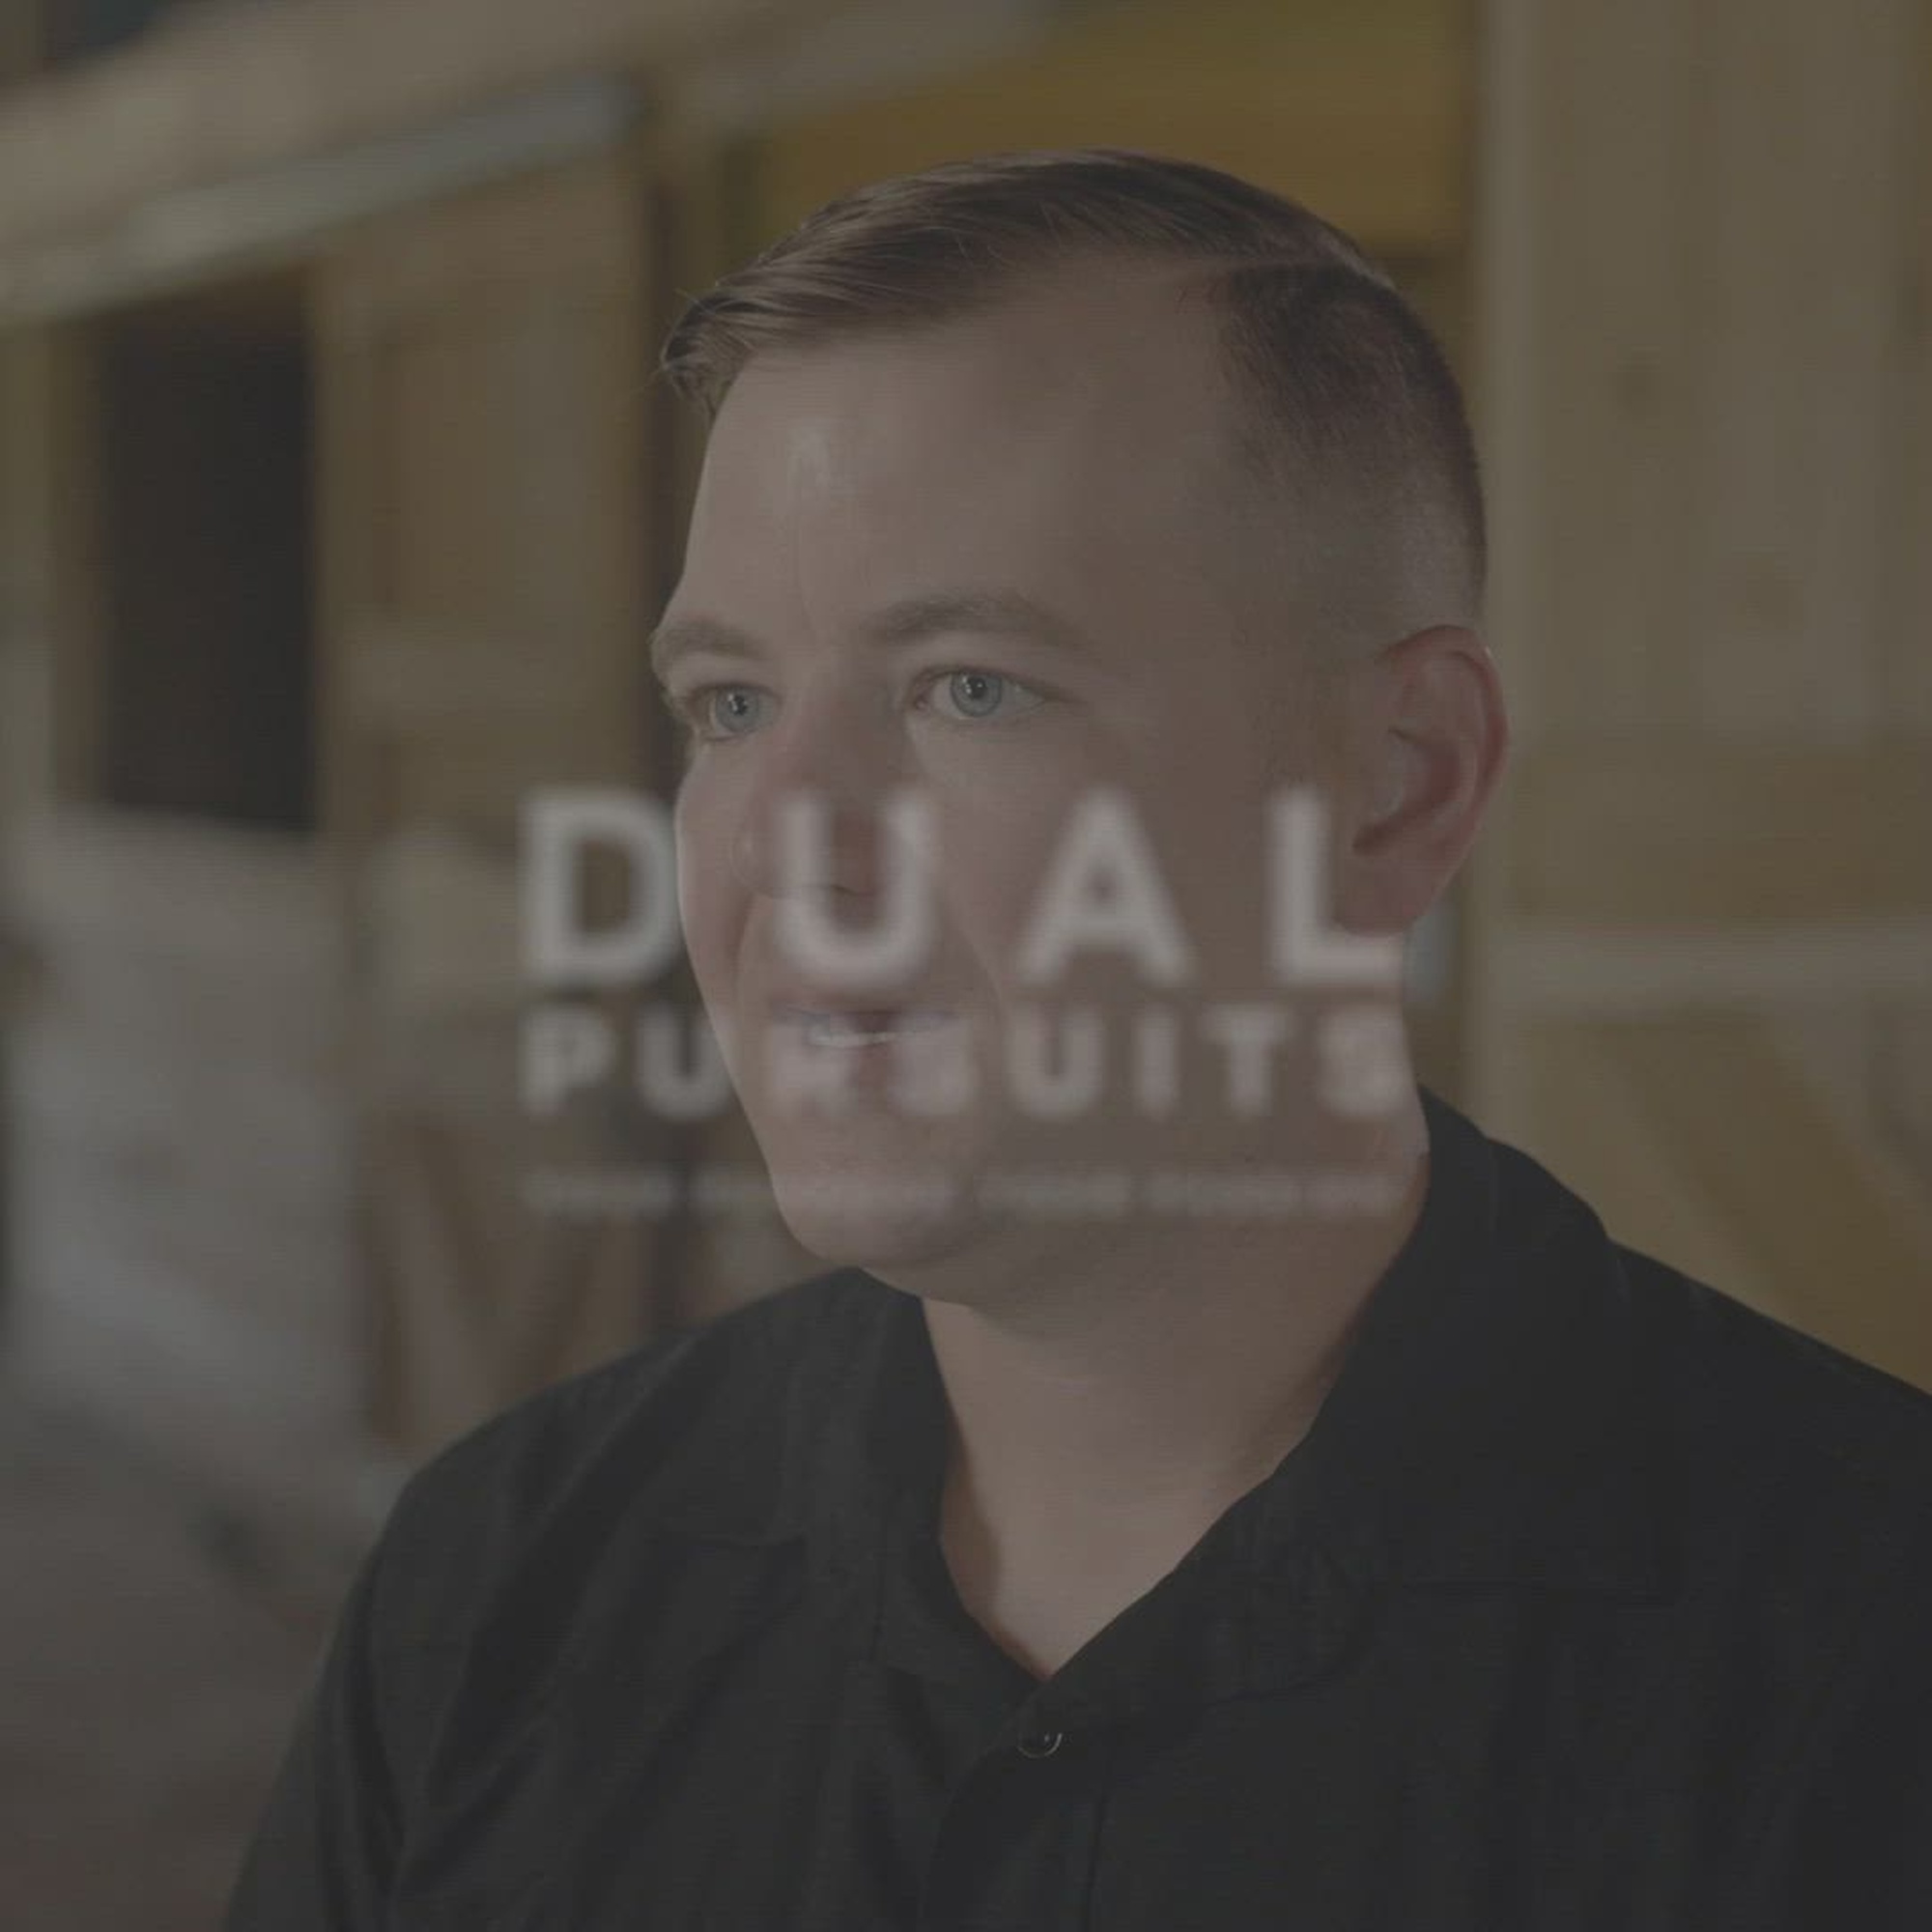 Part of the “Dual Pursuits” video series featuring diverse Army Reserve Soldiers and their unique paths to service.
 
Luke Jean is a public affairs officer that transitioned from Active Duty to the Army Reserve, which gave him the flexibility to pursue being a distiller, while sill serving his community and country.